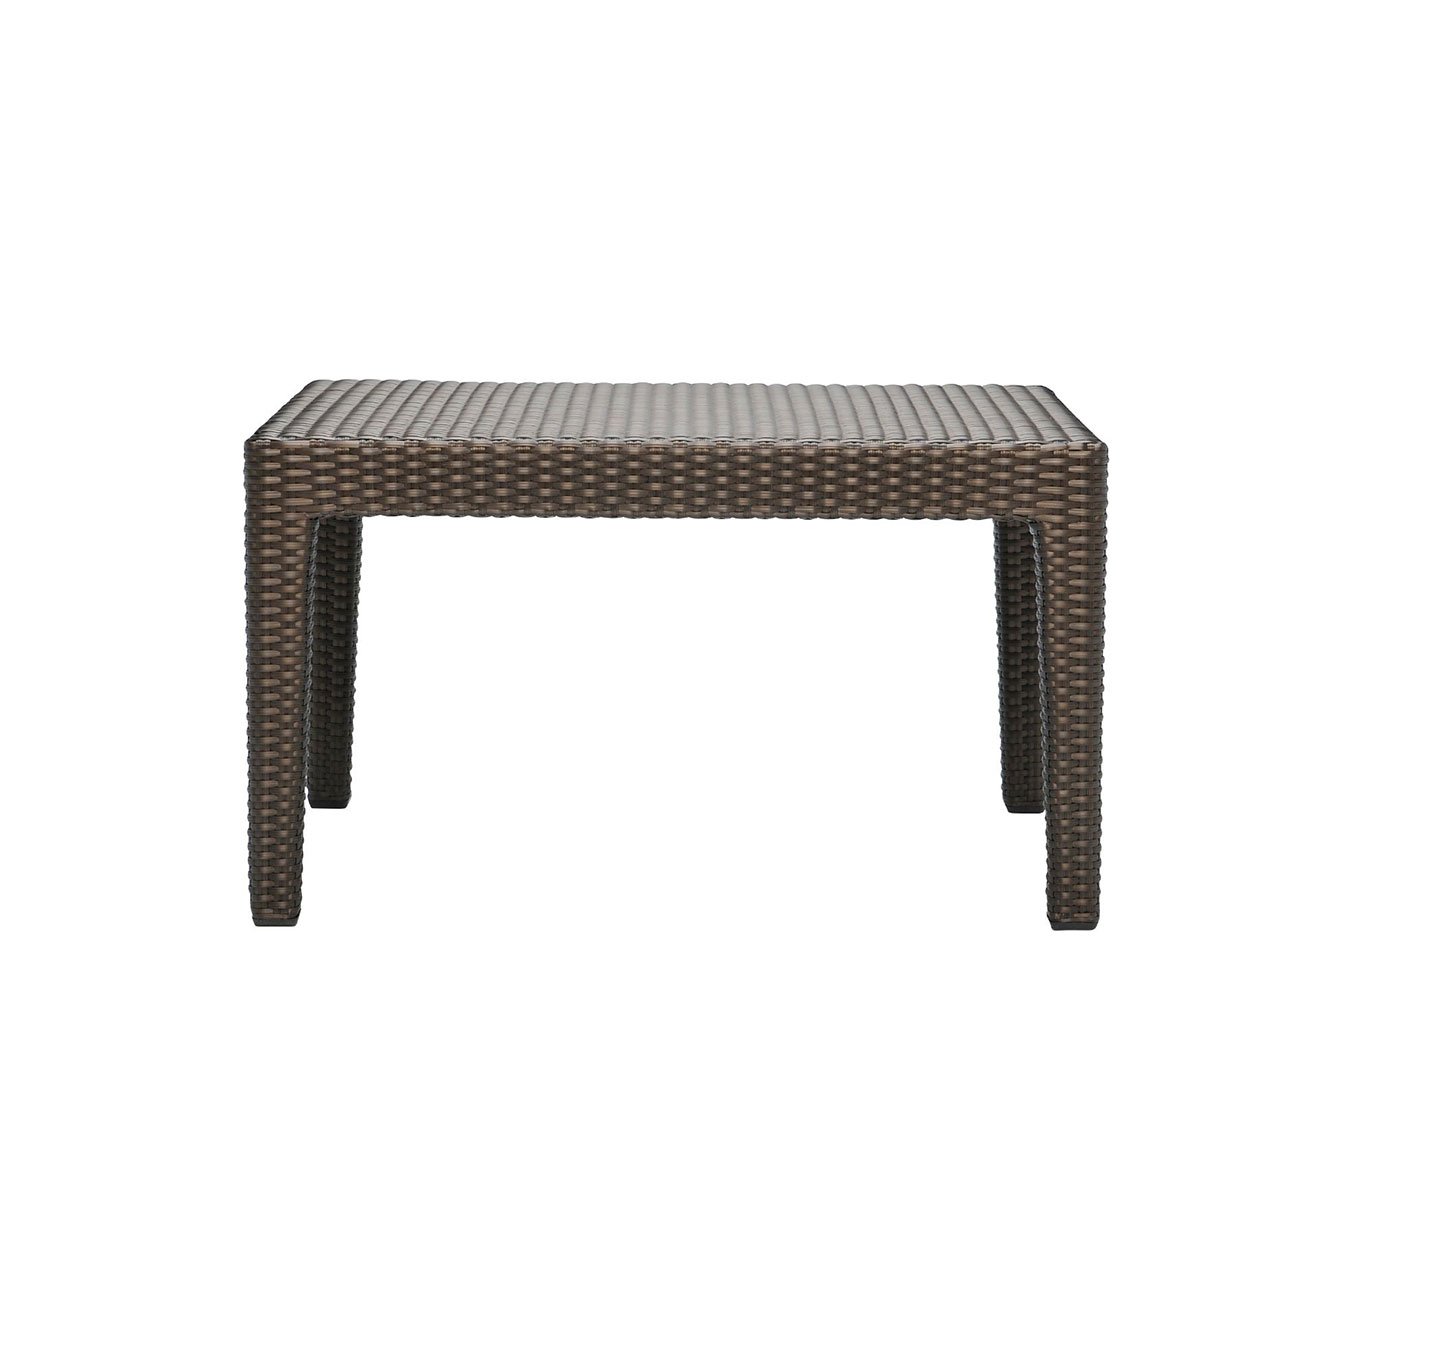 Haworth Quinta table with 4 legs and janusfiber top